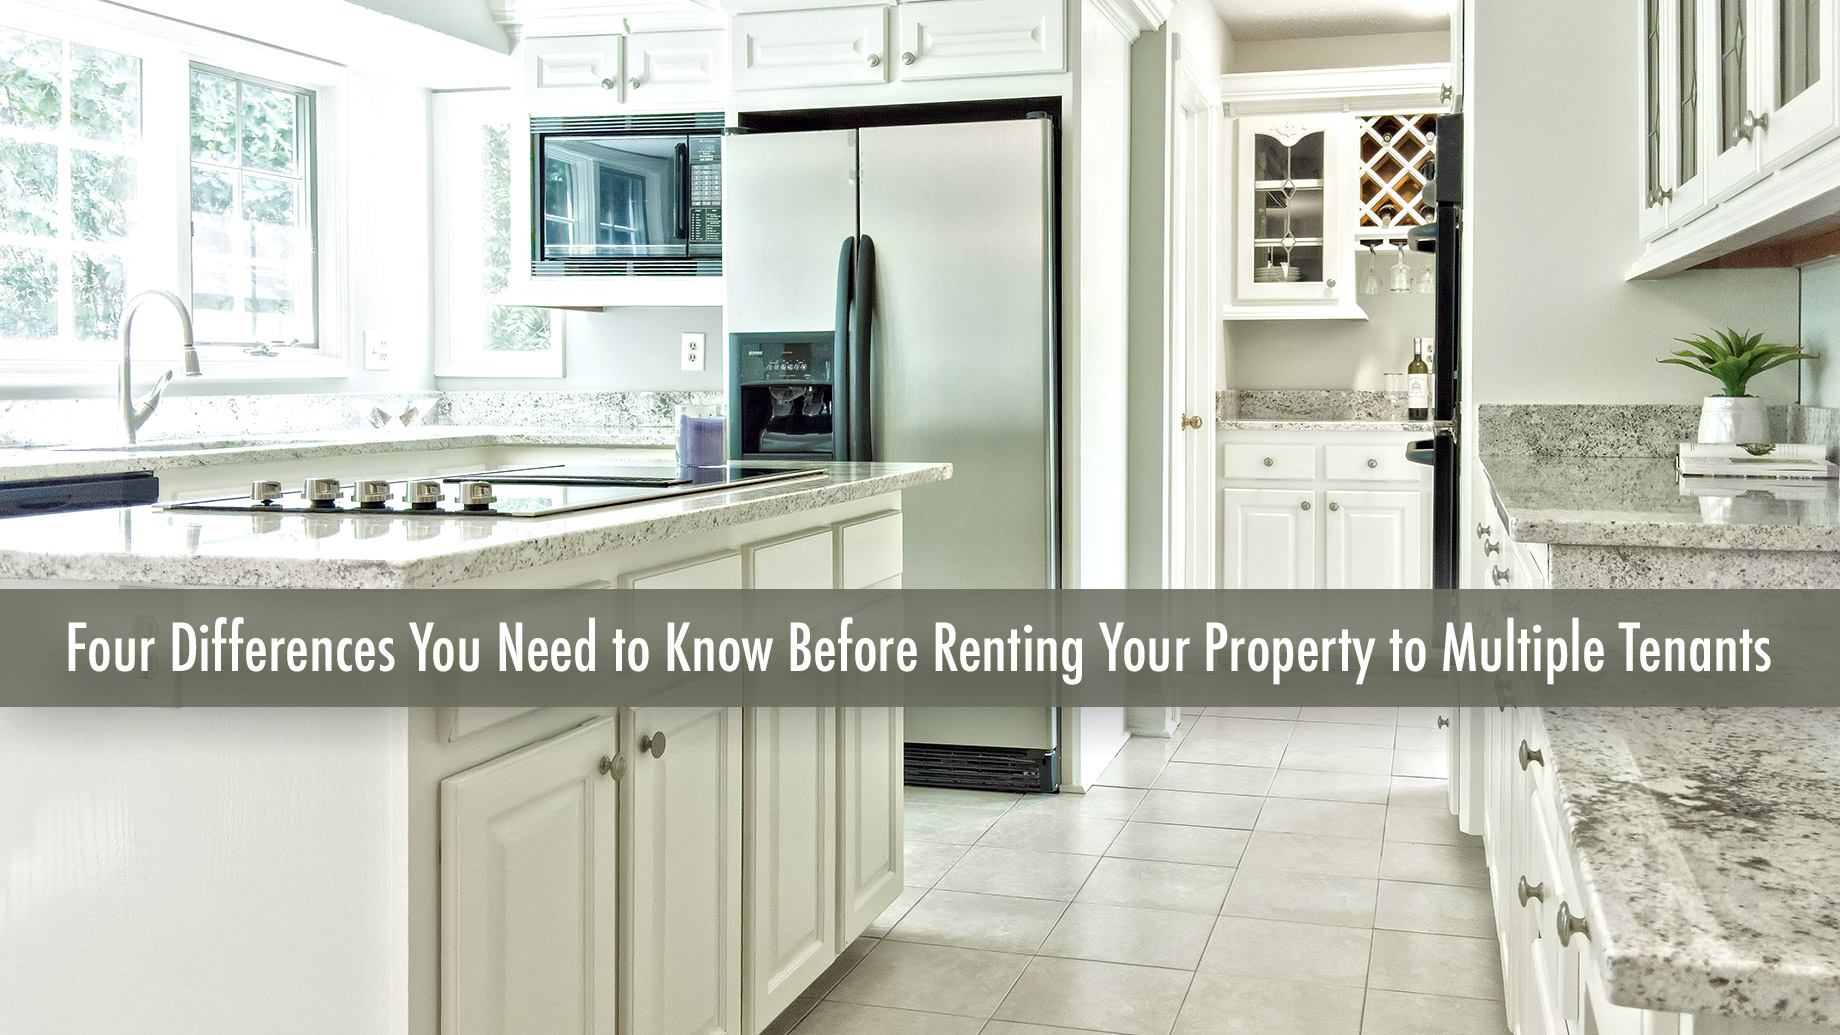 Four Differences You Need to Know Before Renting Your Property to Multiple Tenants